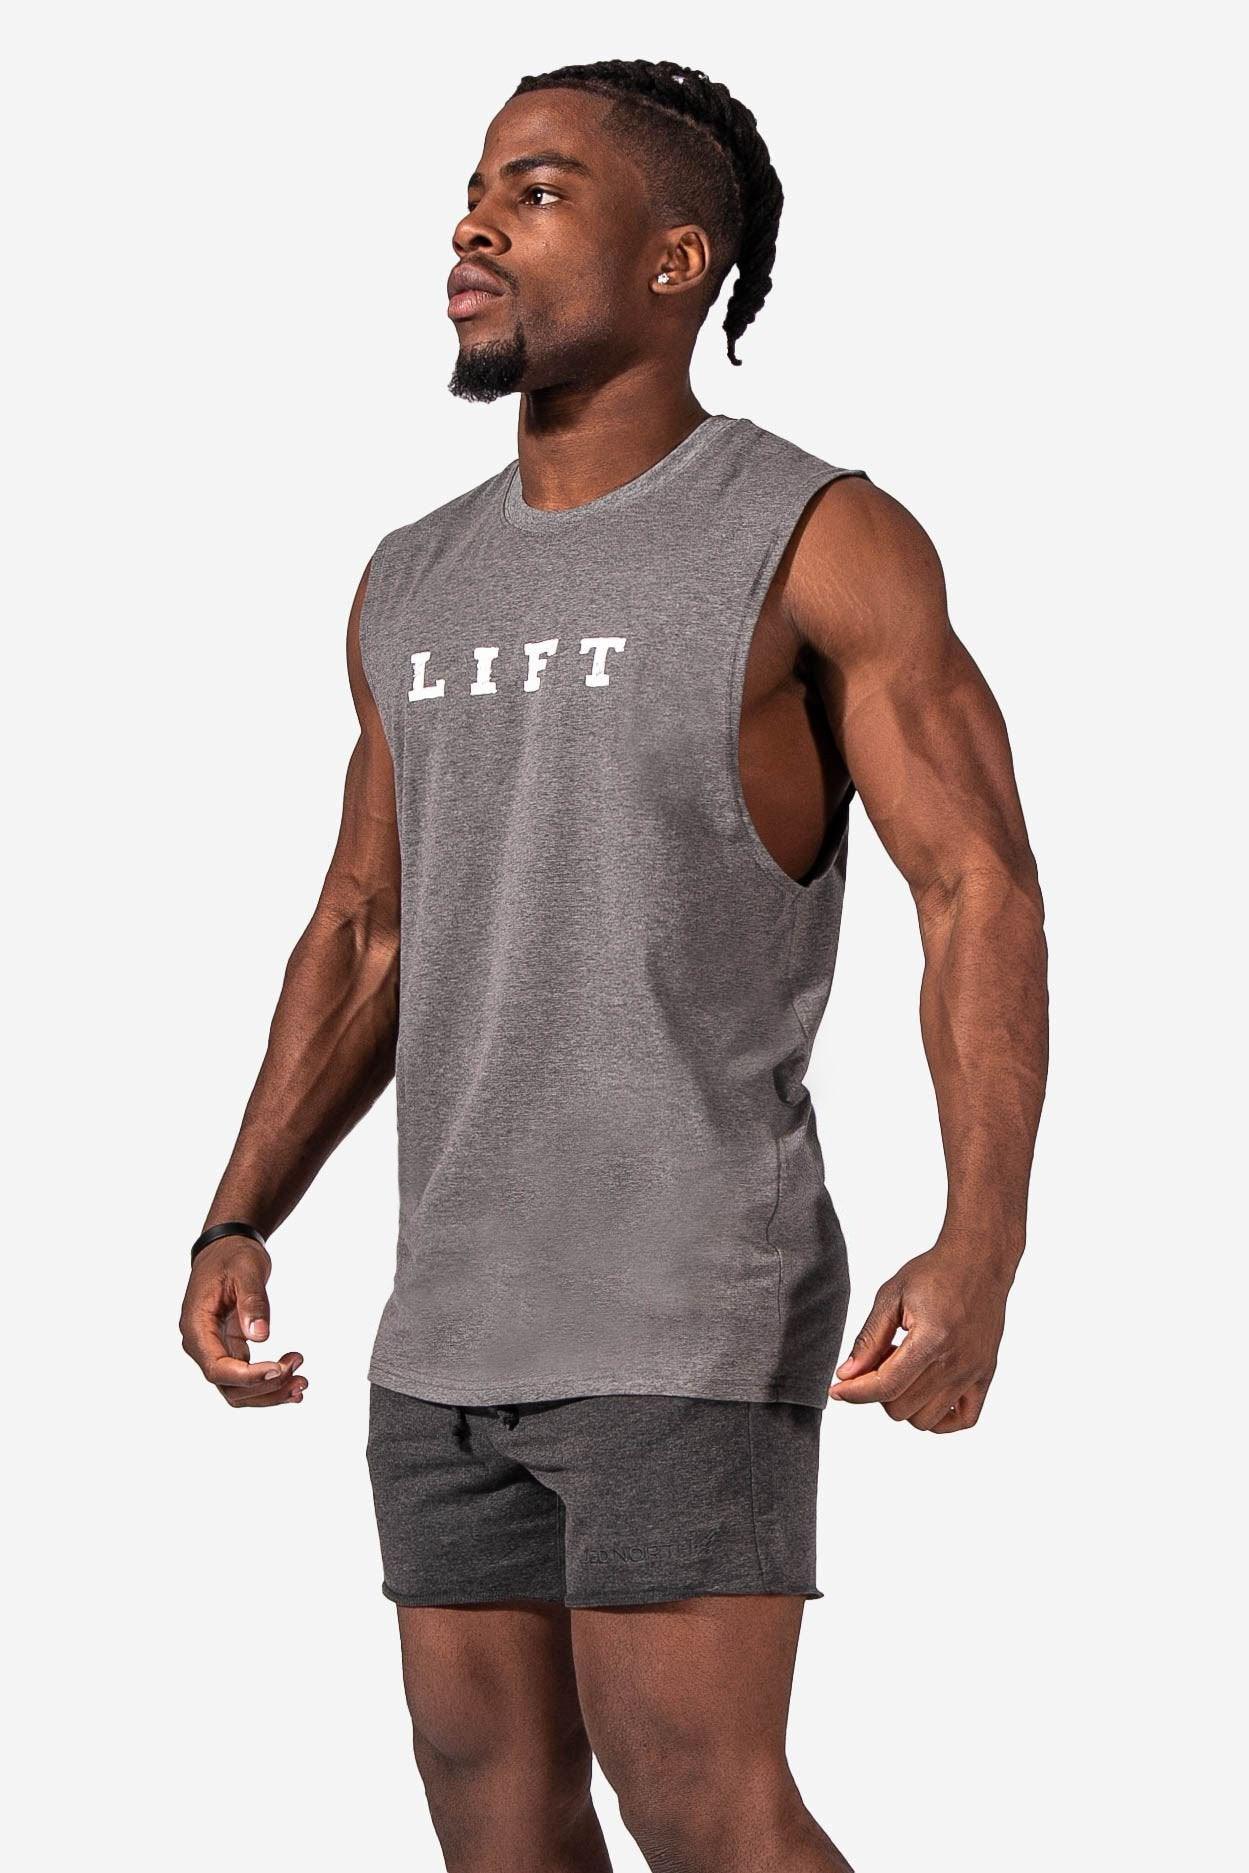 Jed North Men's Workout Tank Tops